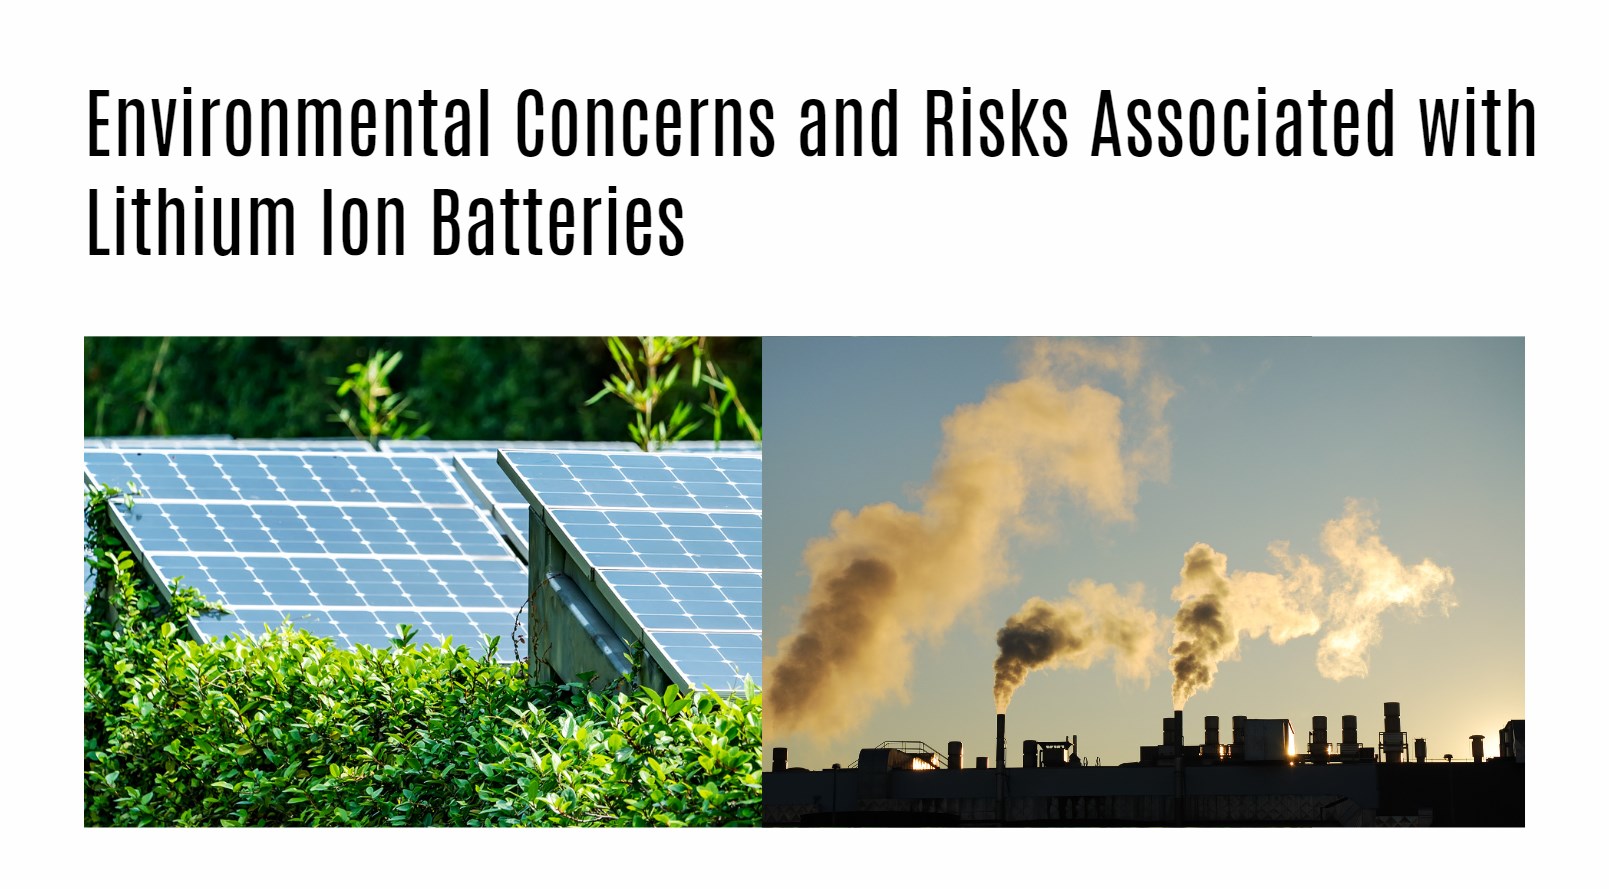 Environmental Concerns and Risks Associated with Lithium Ion Batteries. What Is The Problem With Lithium Ion Batteries For Solar